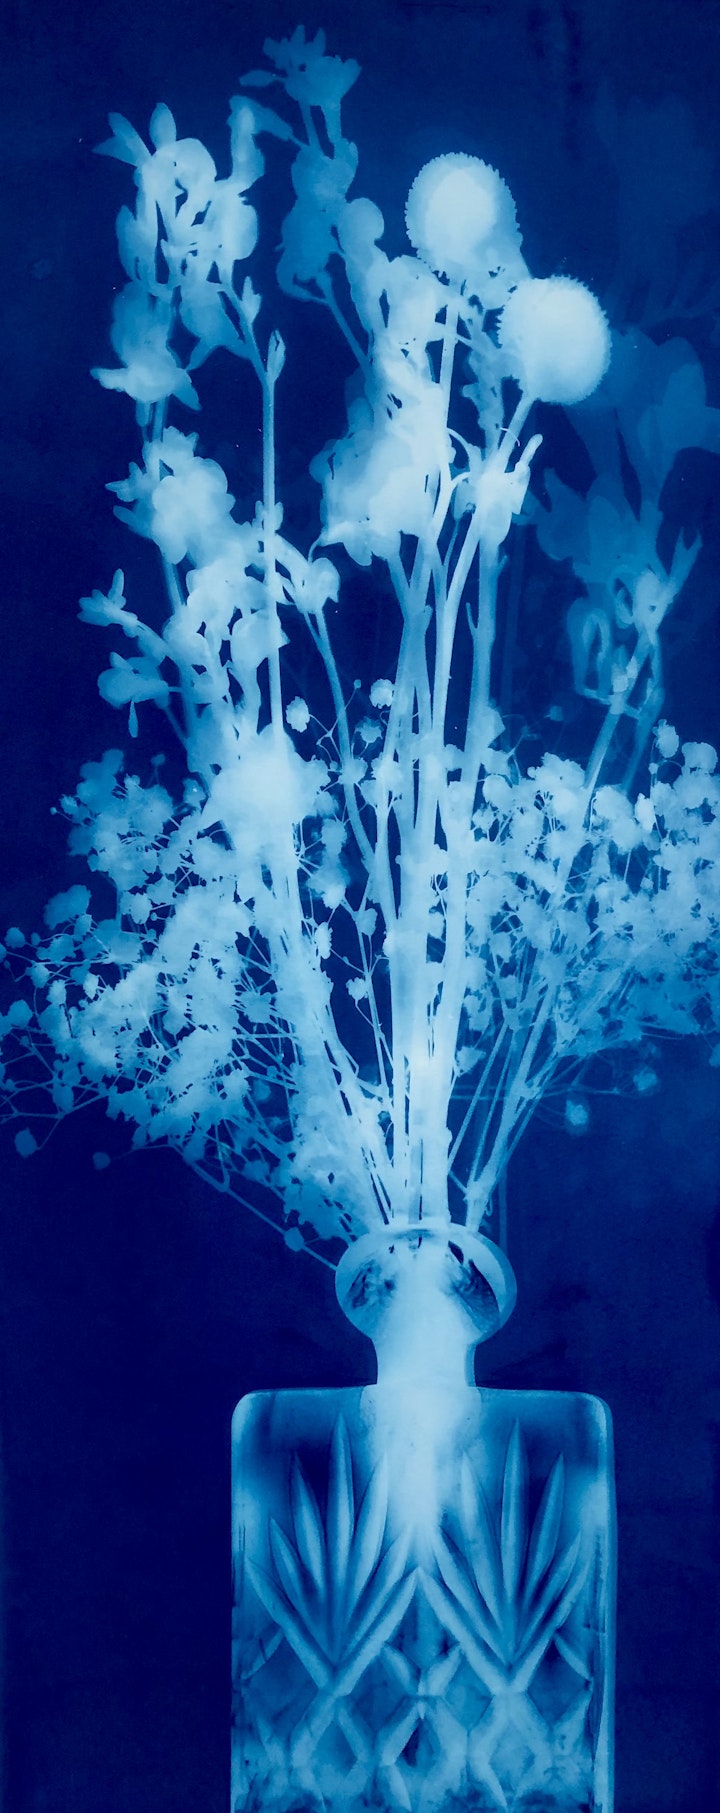 Cut Vase with Cut Flowers, cyanotype photogram on Twin Rocker paper, 22x9 inches (#274)